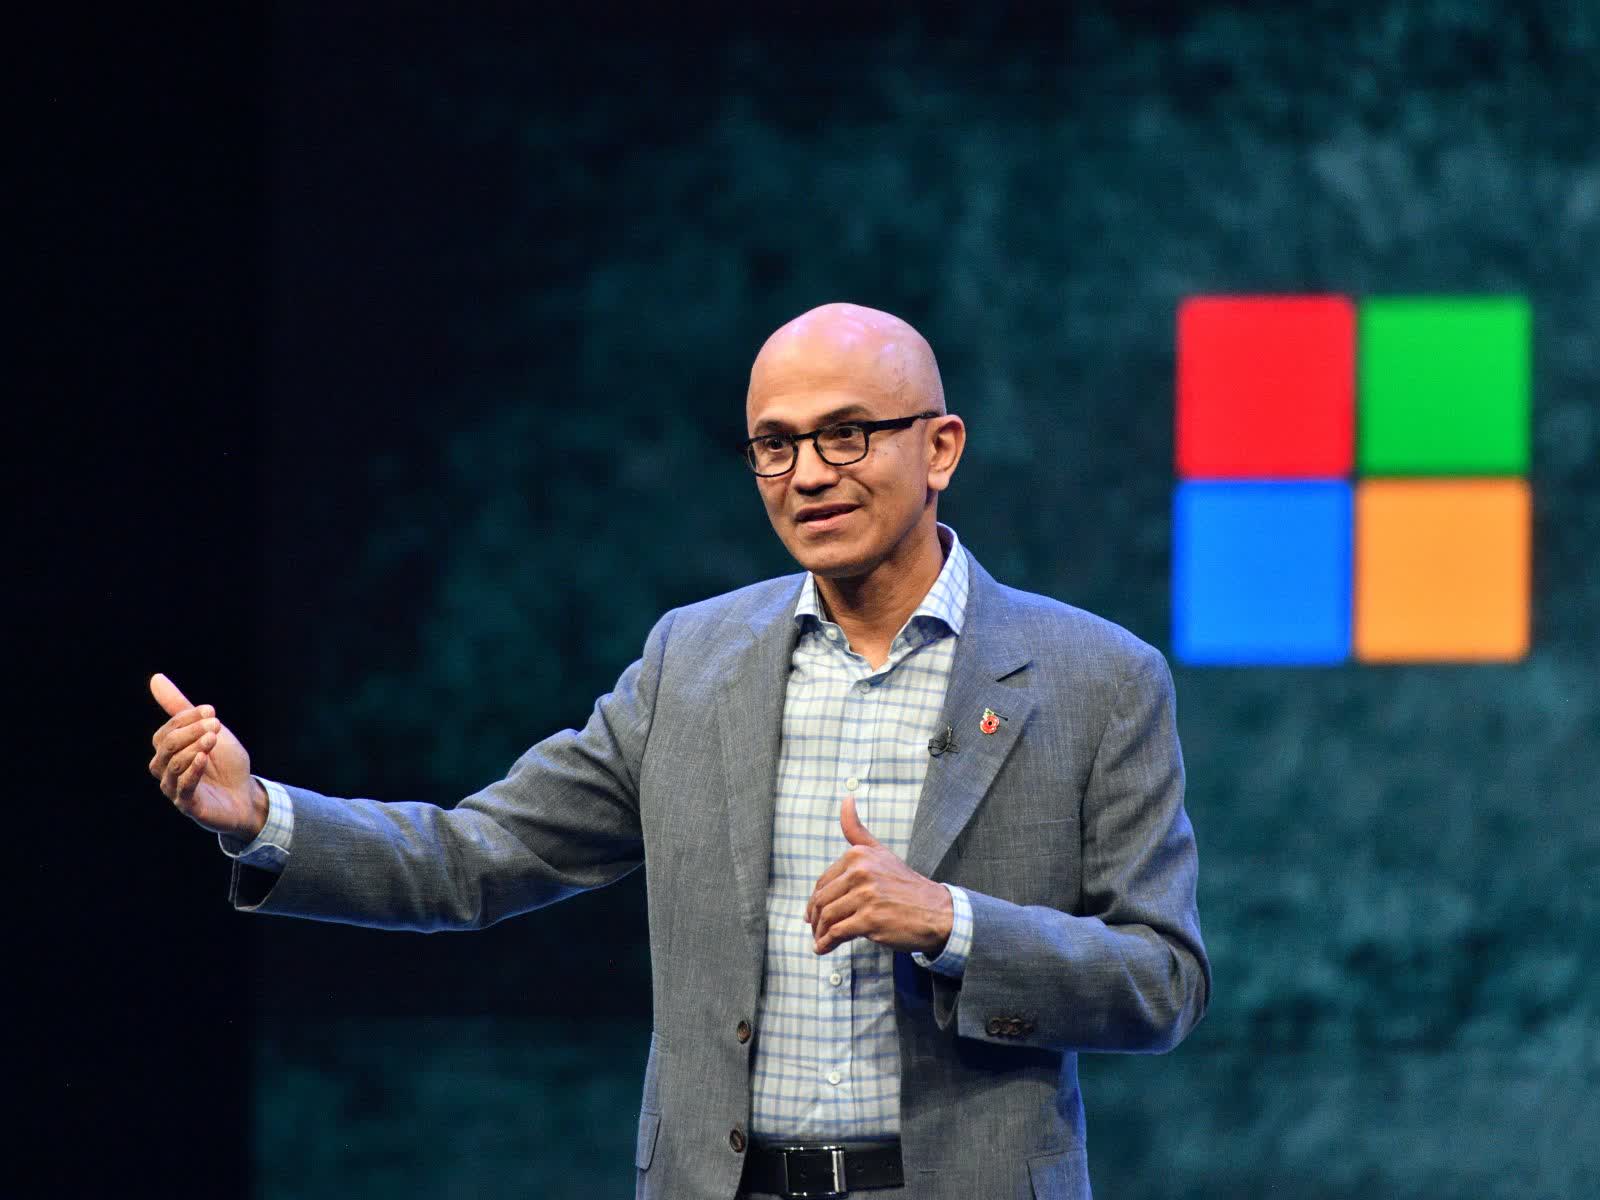 Microsoft CEO Satya Nadella warns that hackers could cause breakdown in world order, calls for digital Geneva Convention